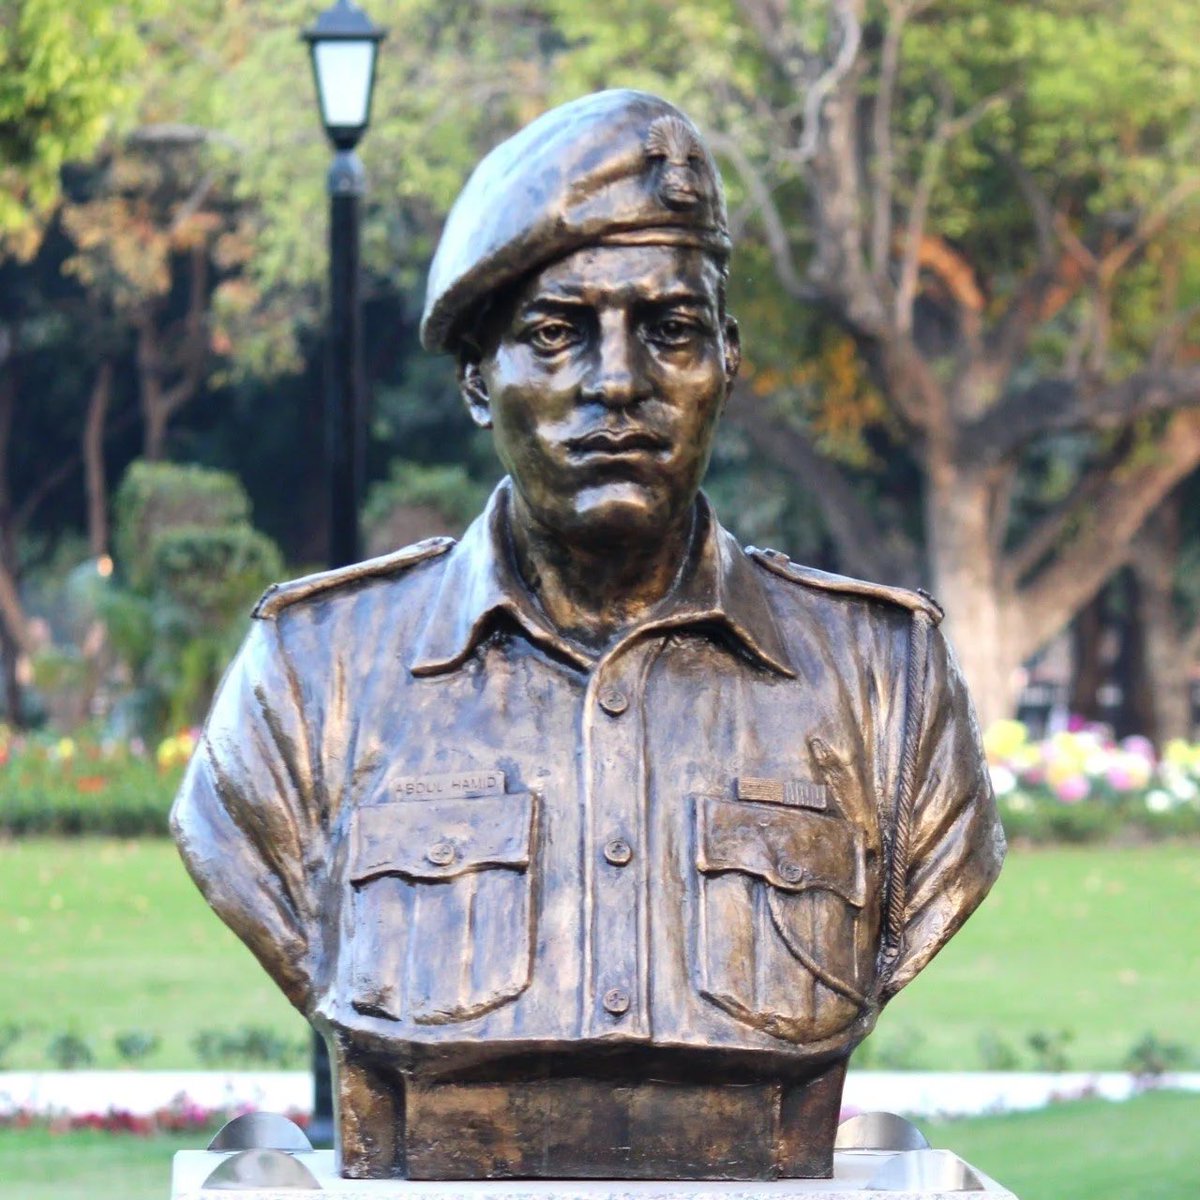 CQMH Abdul Hamid is awarded the Param Vir Chakra posthumously. The battalion is awarded the Battle Honour Asal Uttar and the Theatre Honour Punjab.It is a first in military history that a battalion armed with nothing more than recoilless guns has fought off an armoured division